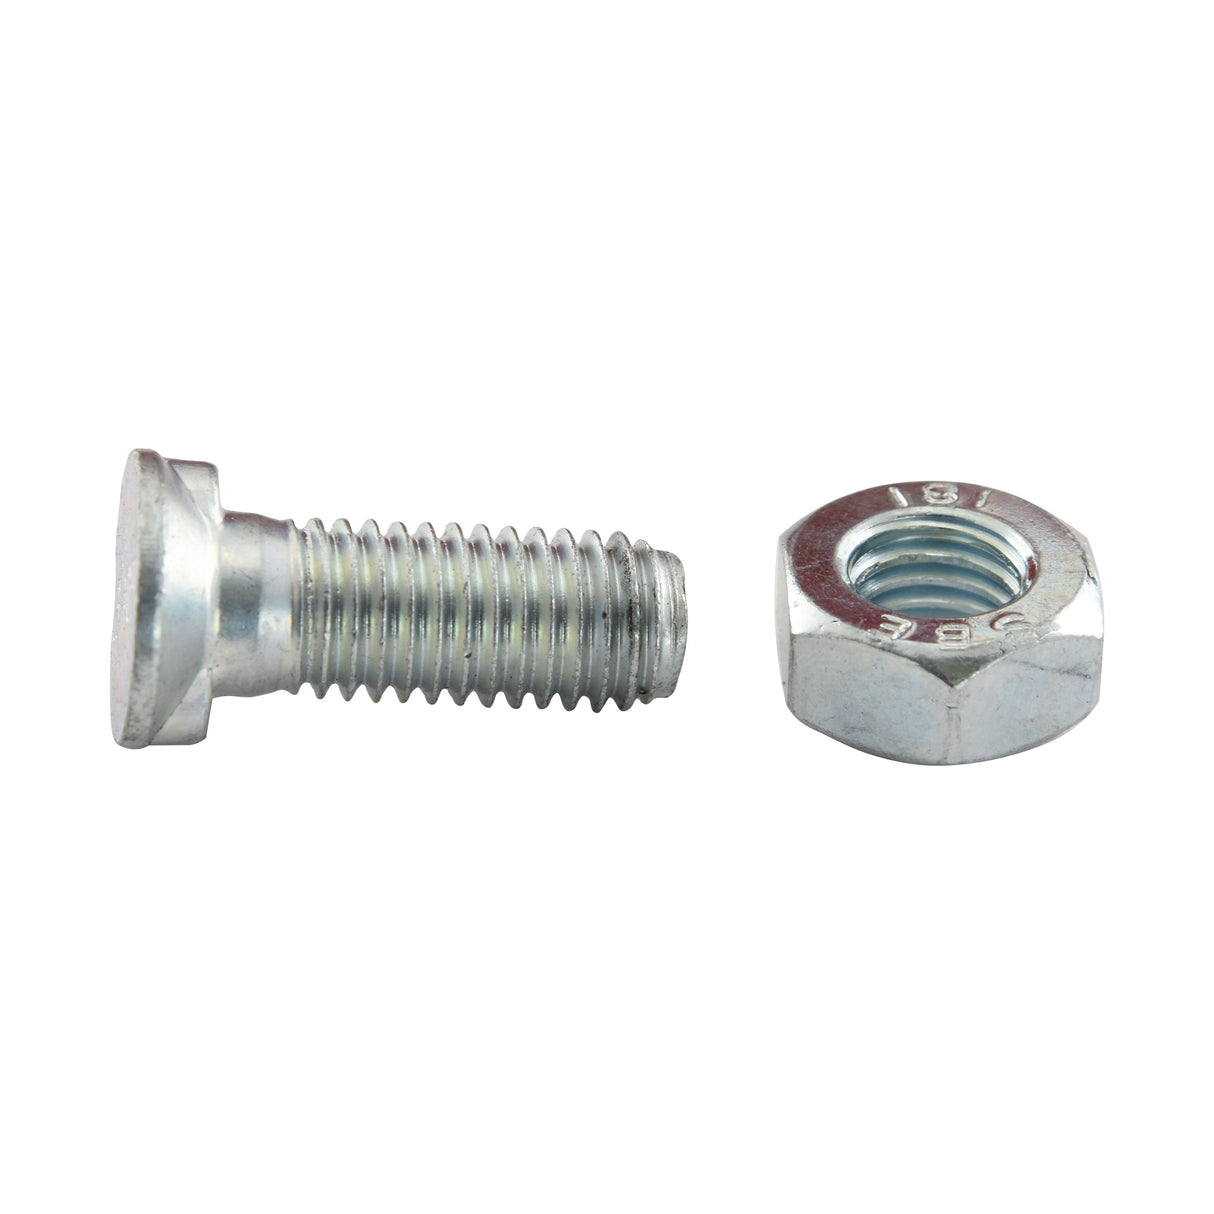 Countersunk Head Bolt 2 Nibs With Nut (TF2E) - M14 x 40mm, Tensile strength 8.8 (25 pcs. Box)
 - S.78812 - Farming Parts